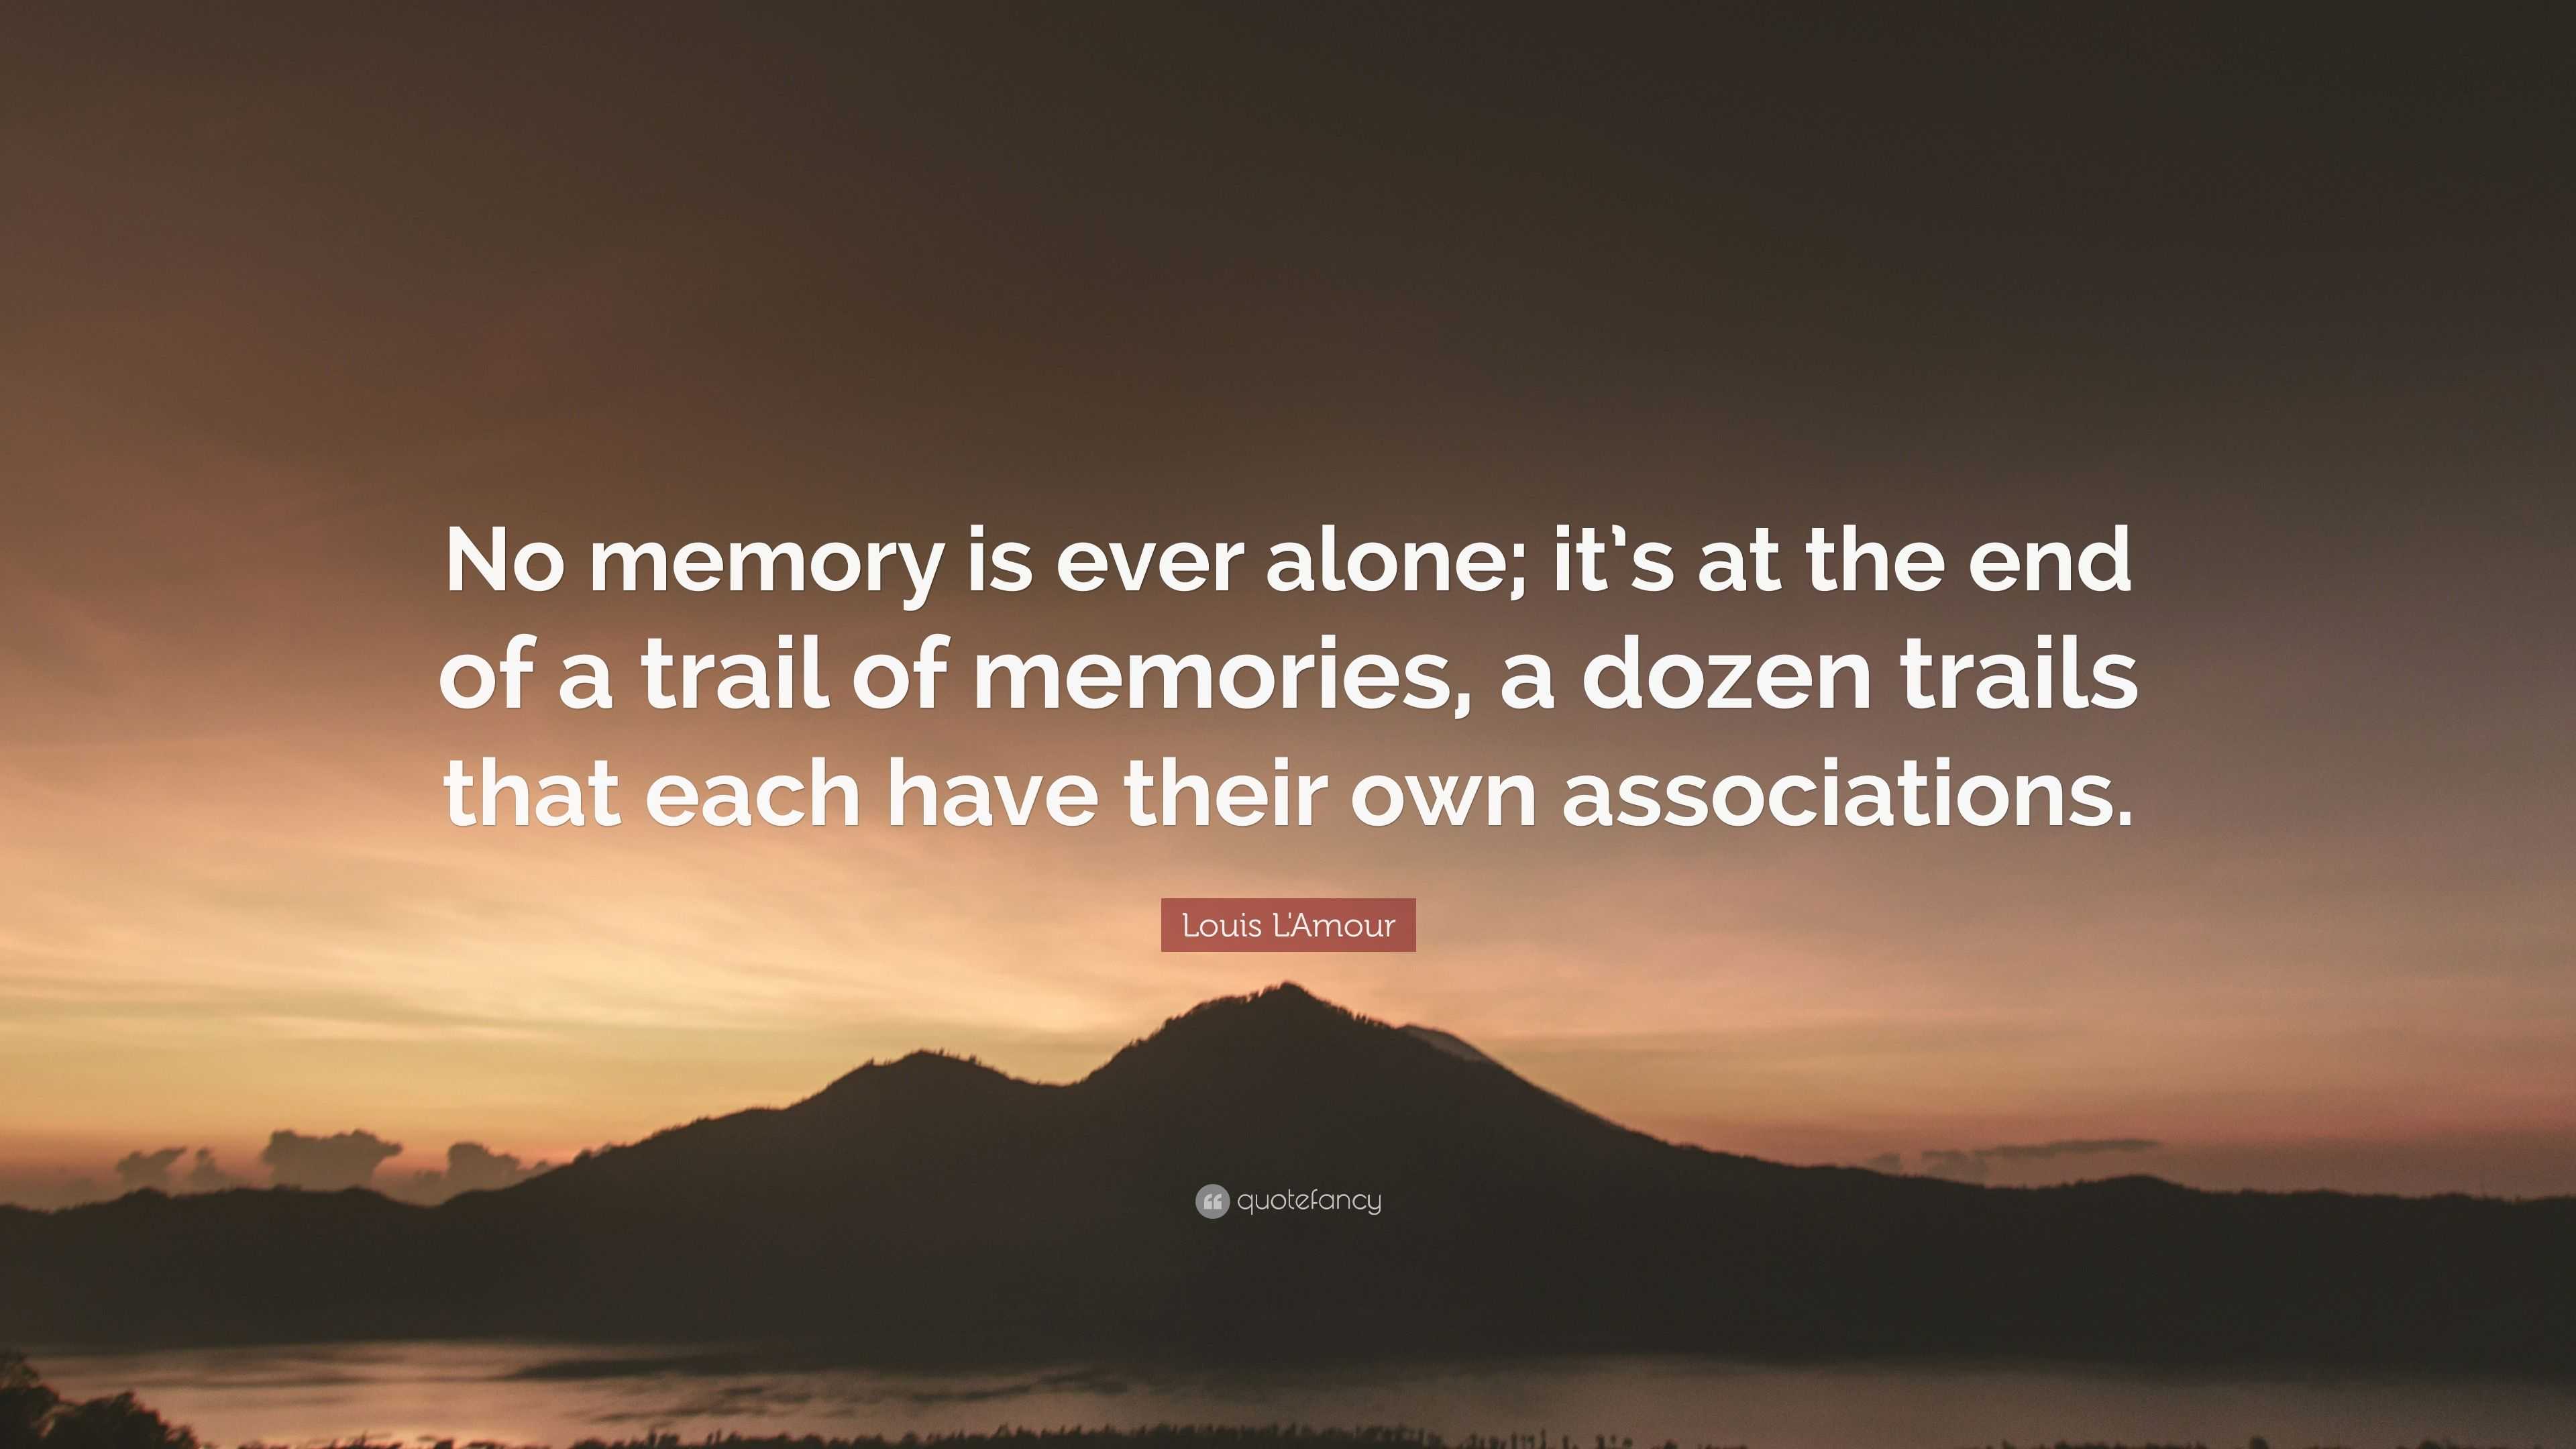 Louis L'Amour Quotes - No memory is ever alone, it's at the end of a trail  of memories, a dozen trails that each have their own associations. ~Echo  Sackett Book: Ride The